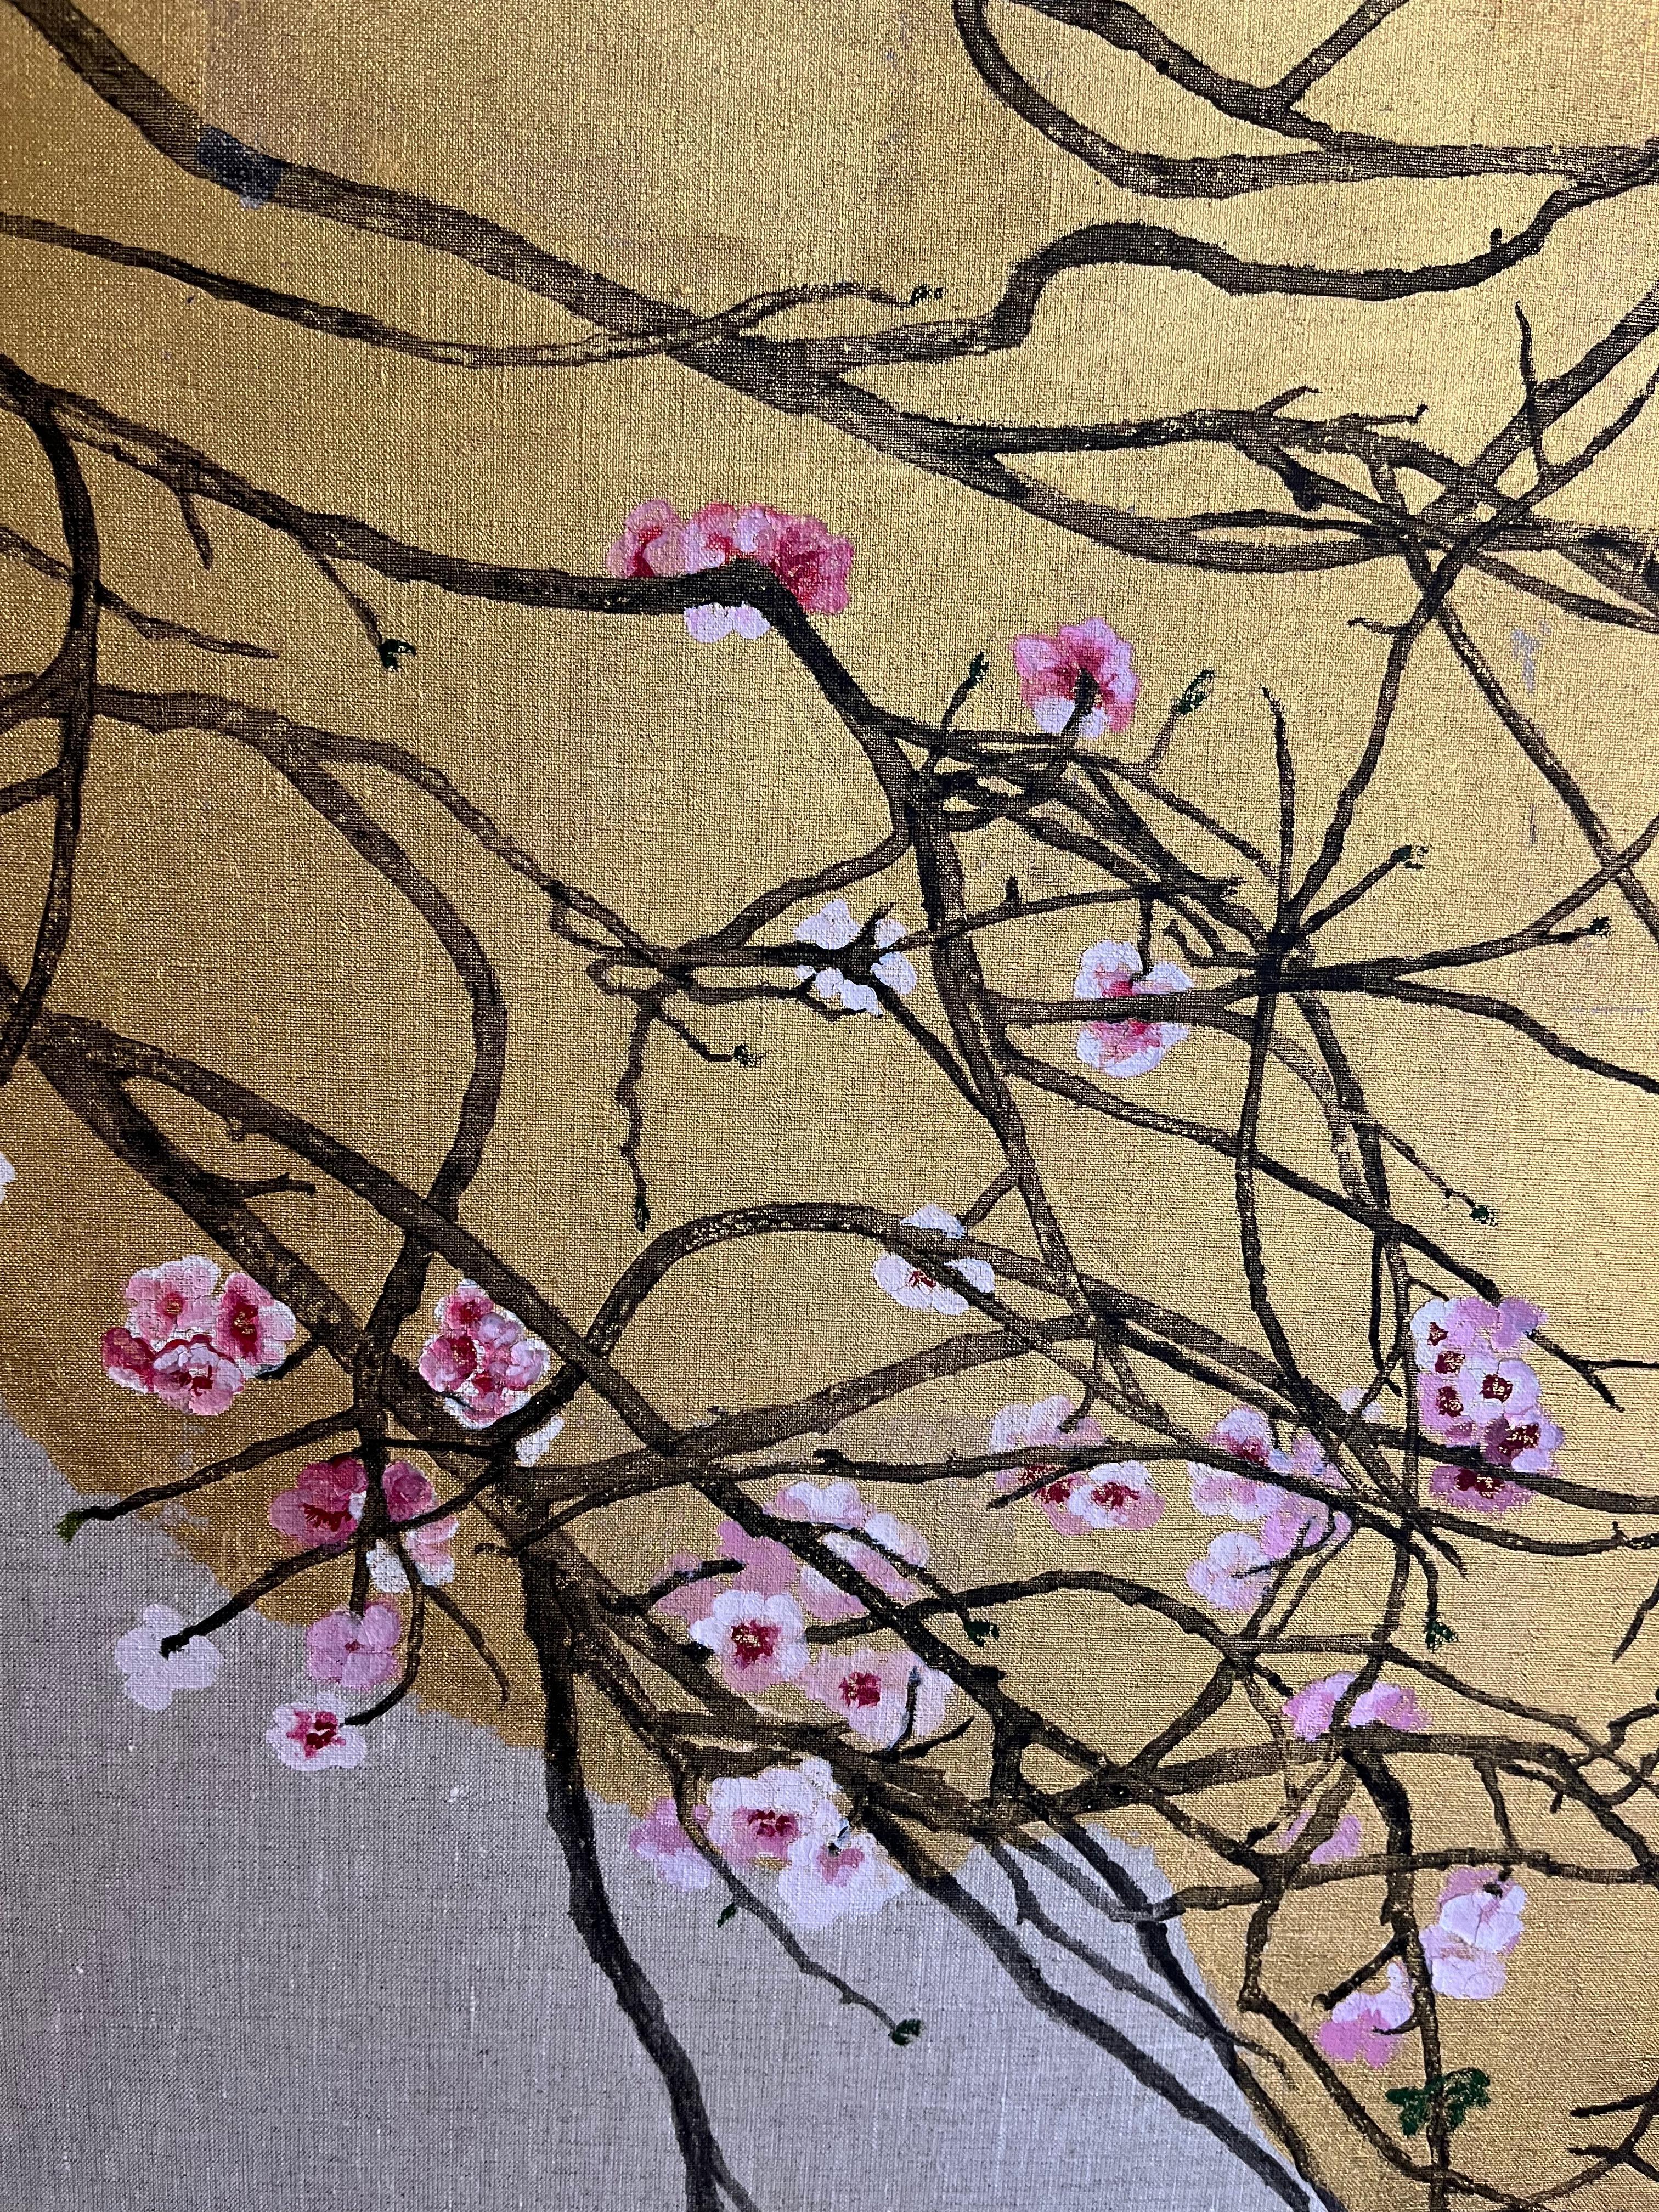 Peach blossom, pink and butterflies, on old foreground painting. Innovative - Realist Painting by Margherita Leoni